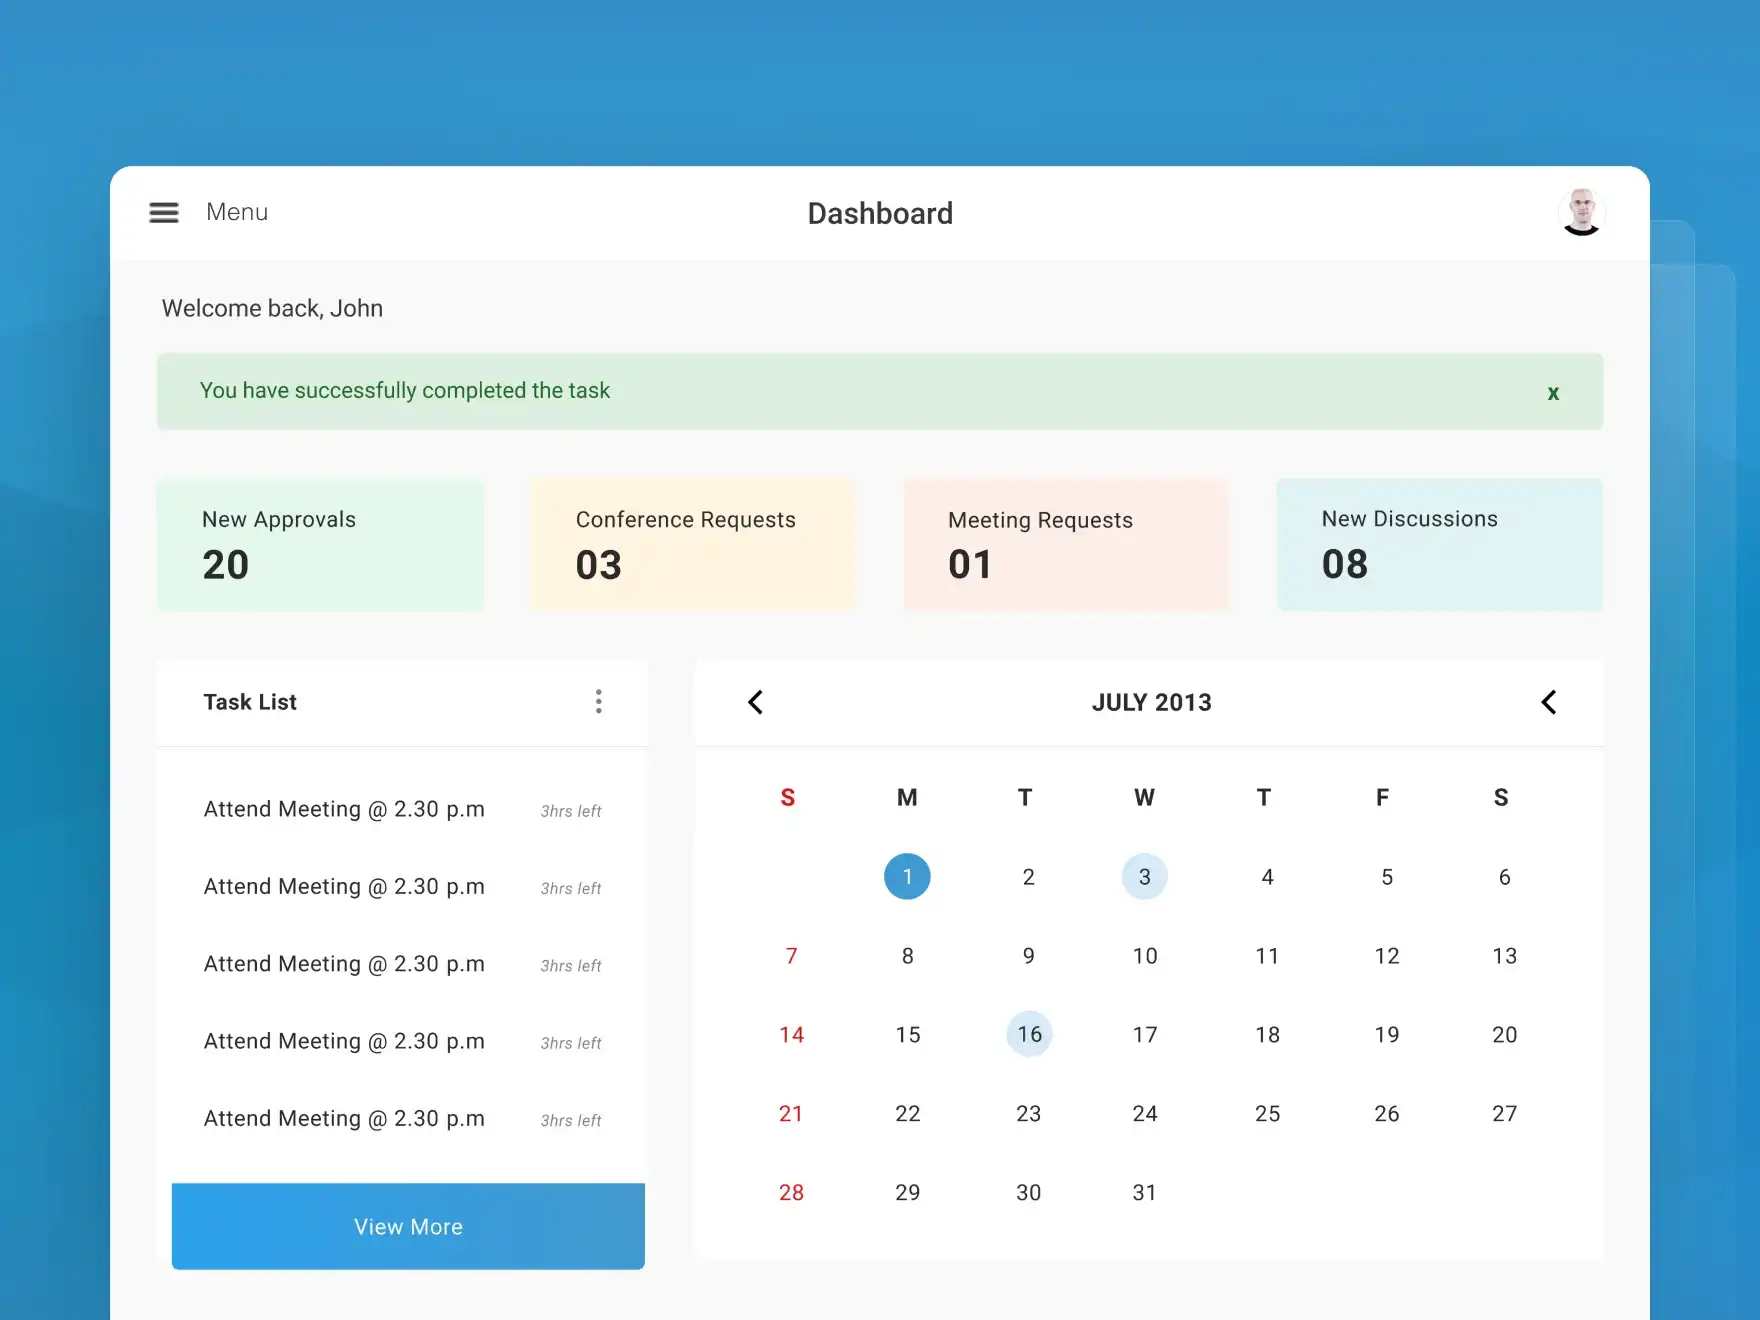 Dashboard to check the task list of board members